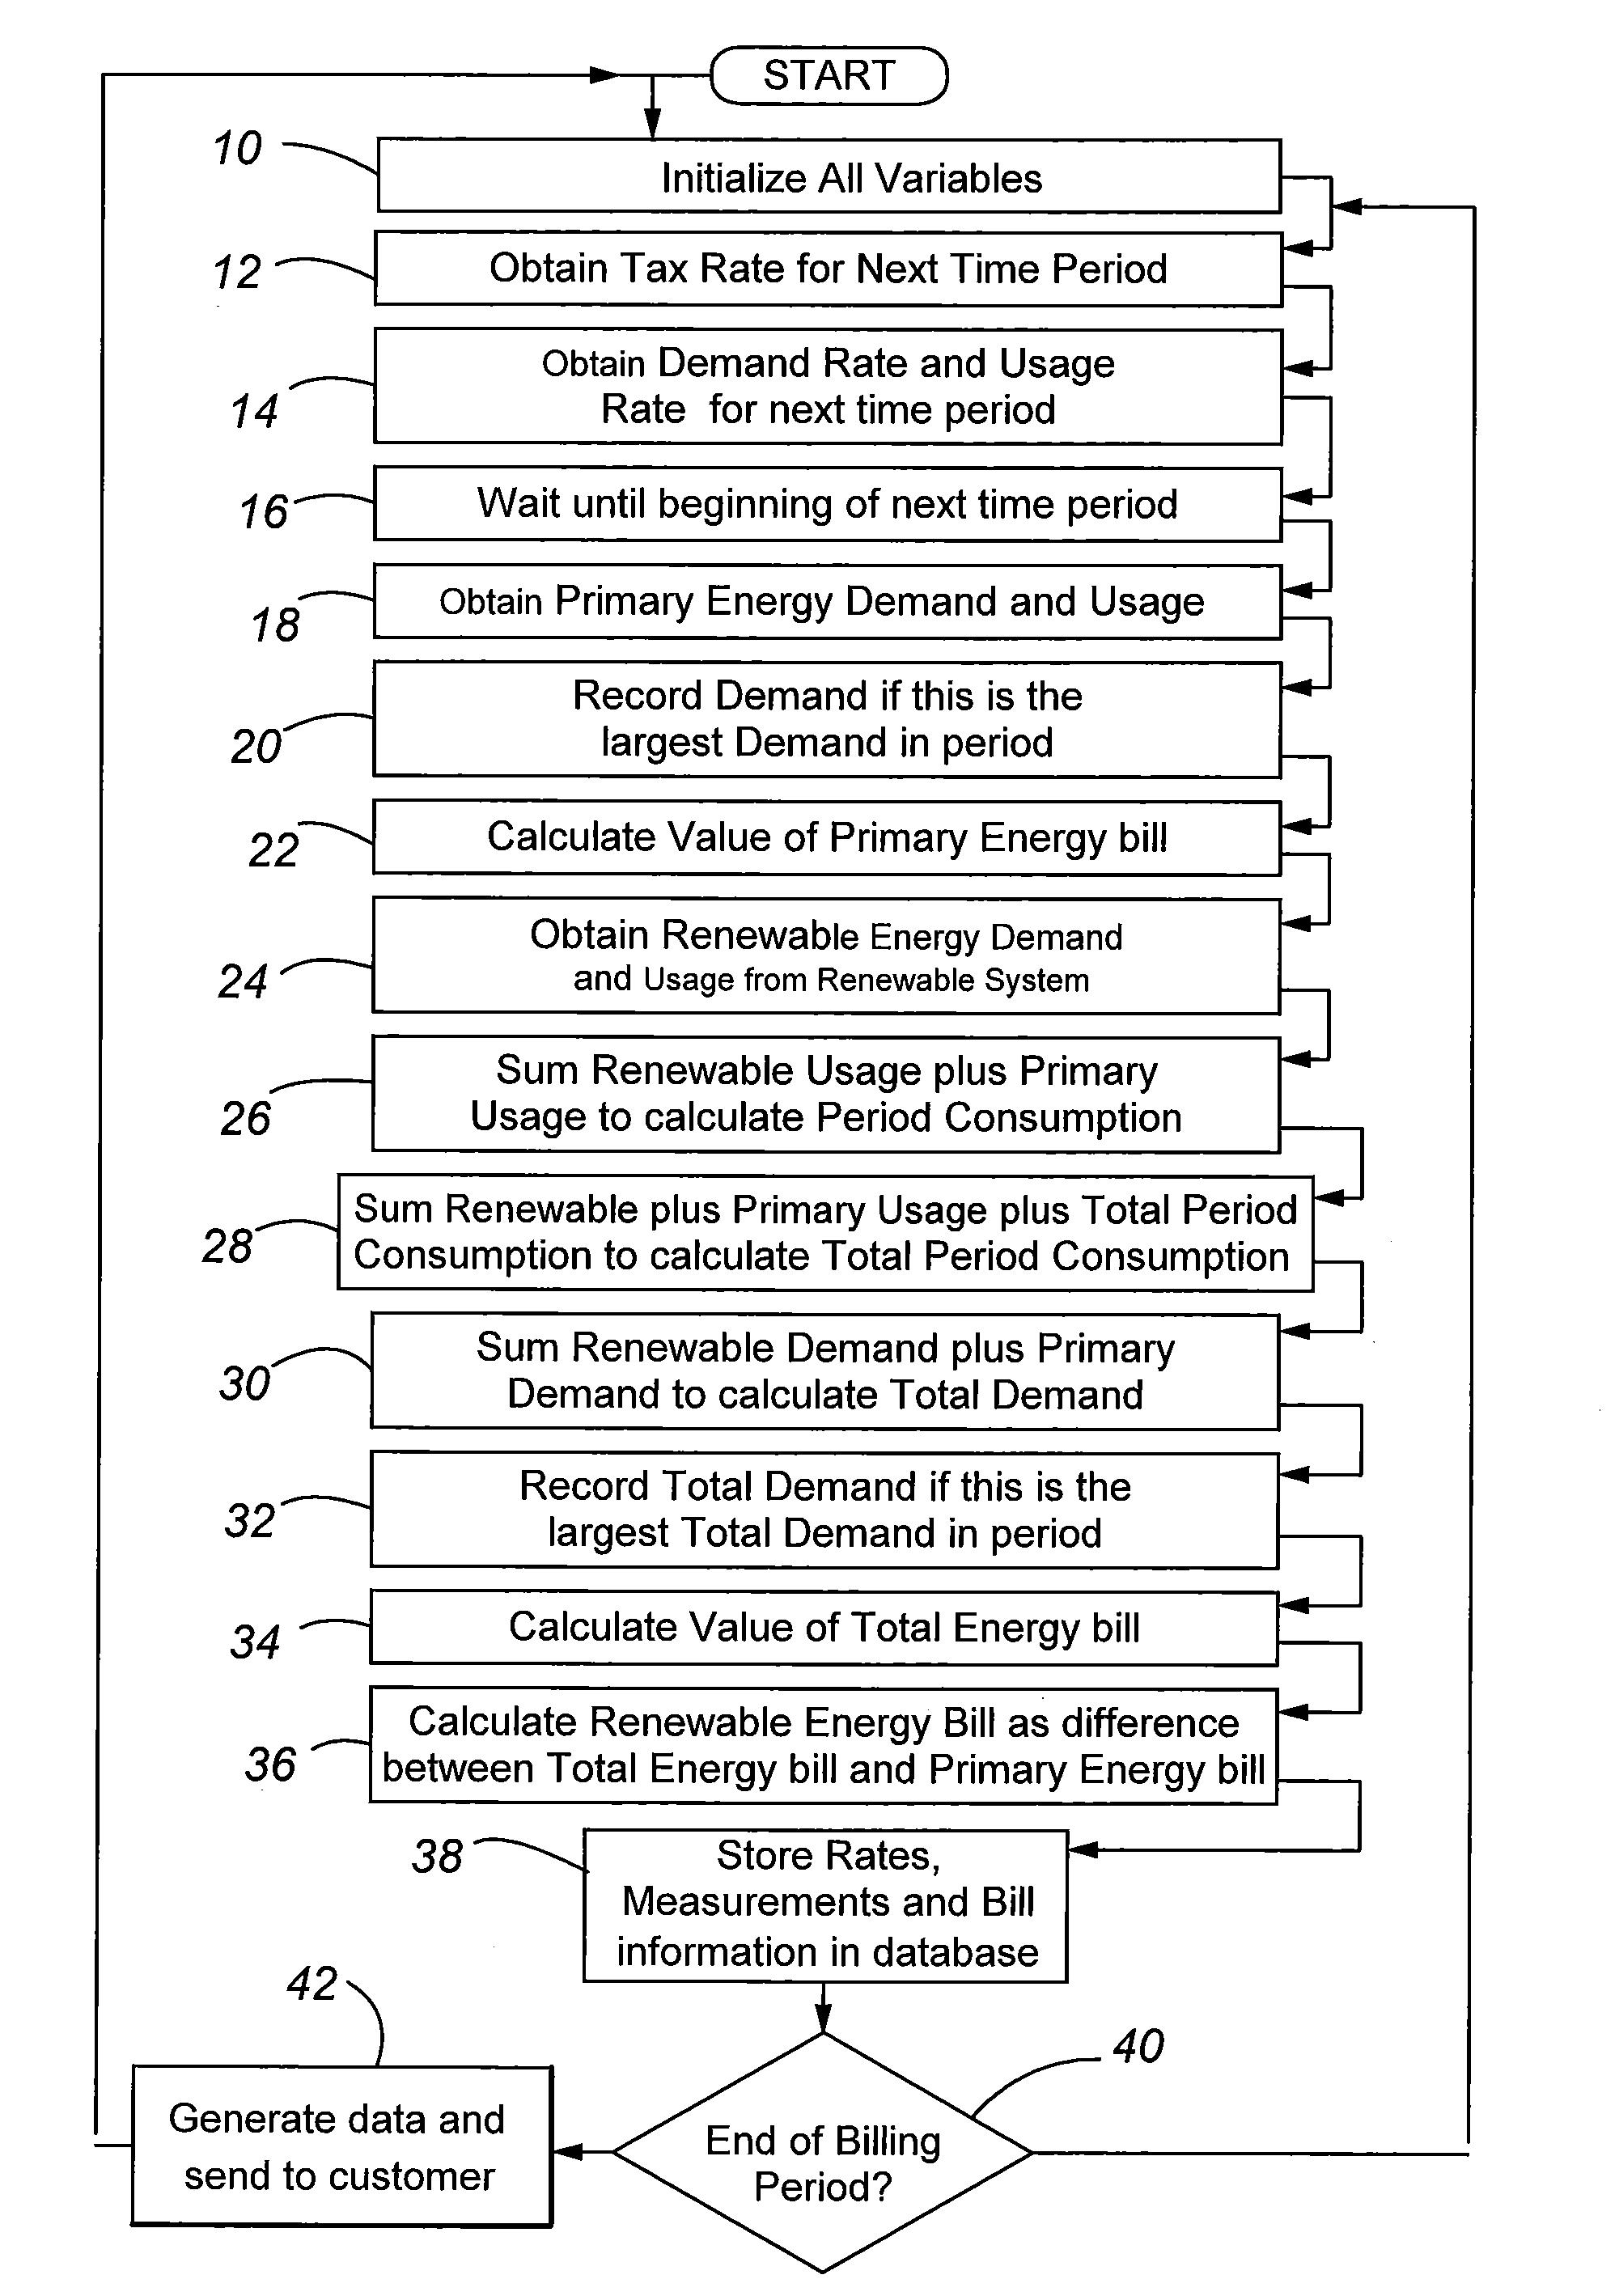 System and method for integrating billing information from alternate energy sources with traditional energy sources